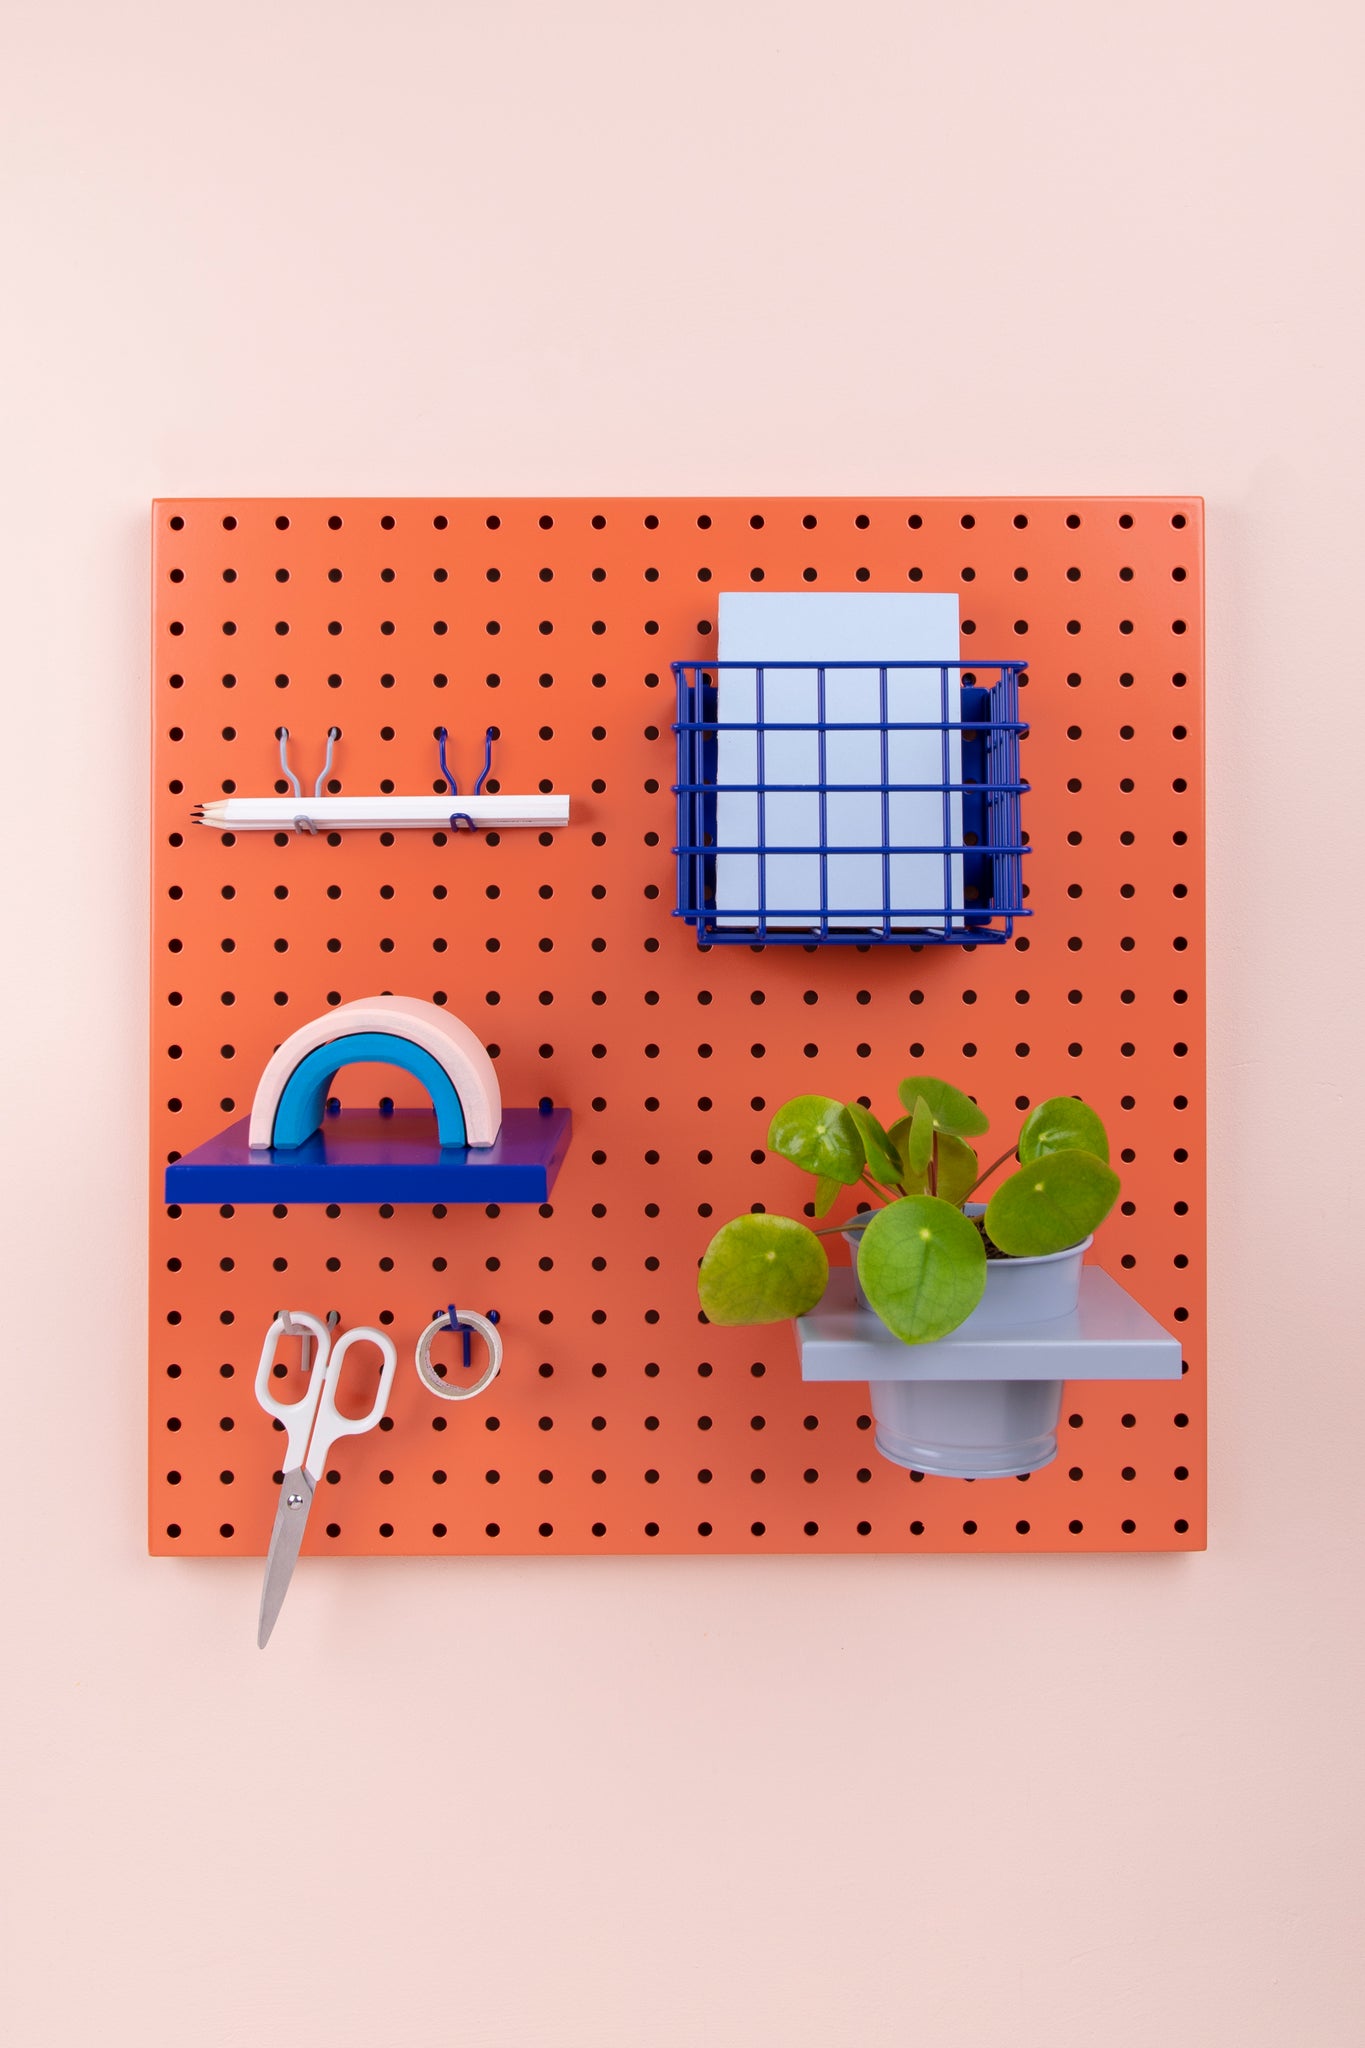 The 50 Pegboard (Coral)